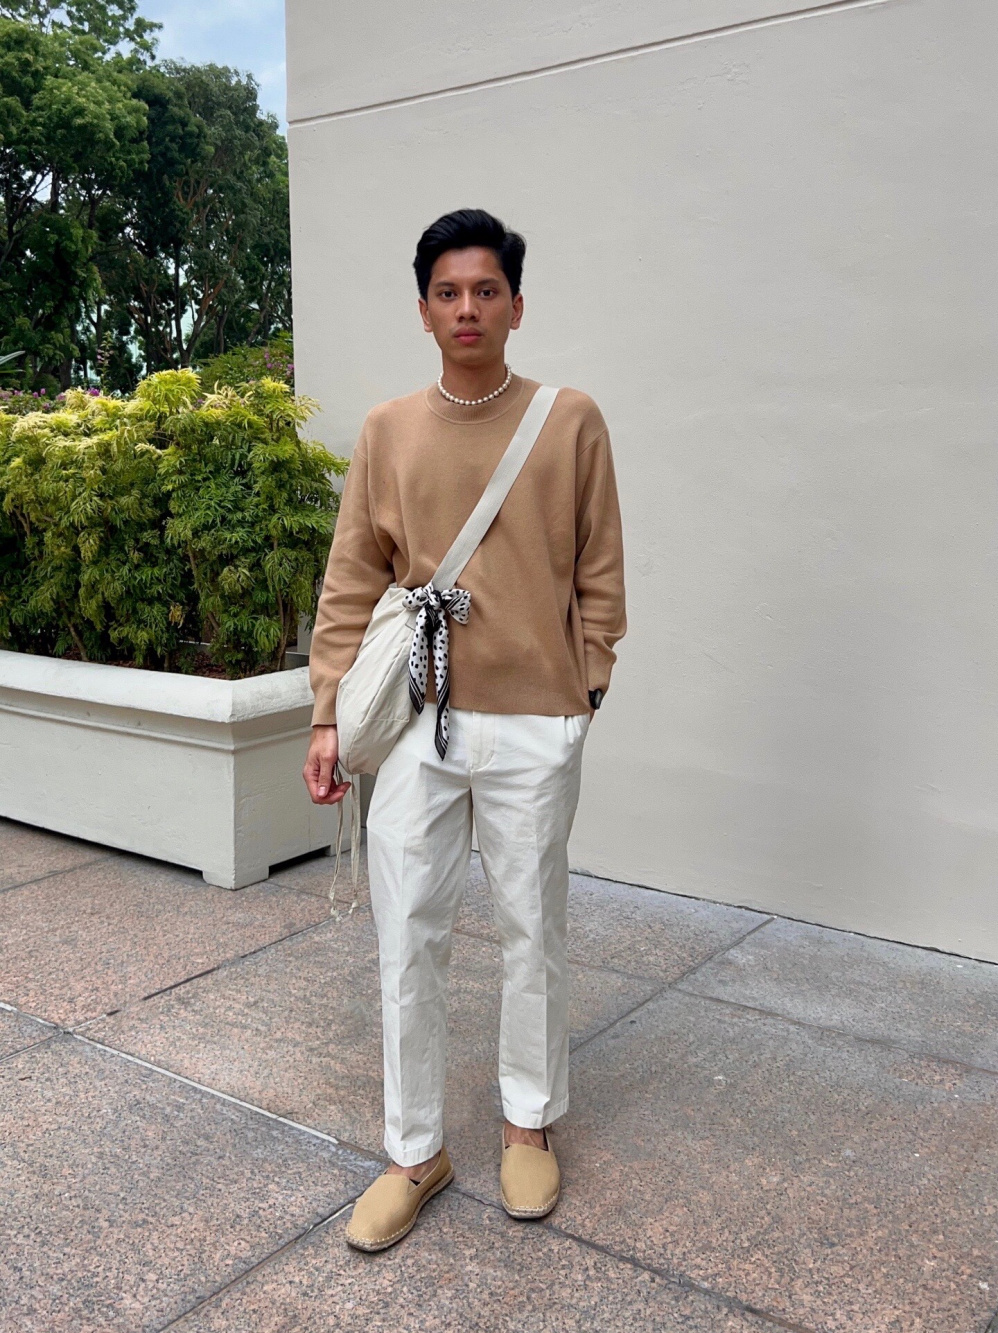 Check styling ideas for「Smart Ankle Pants」